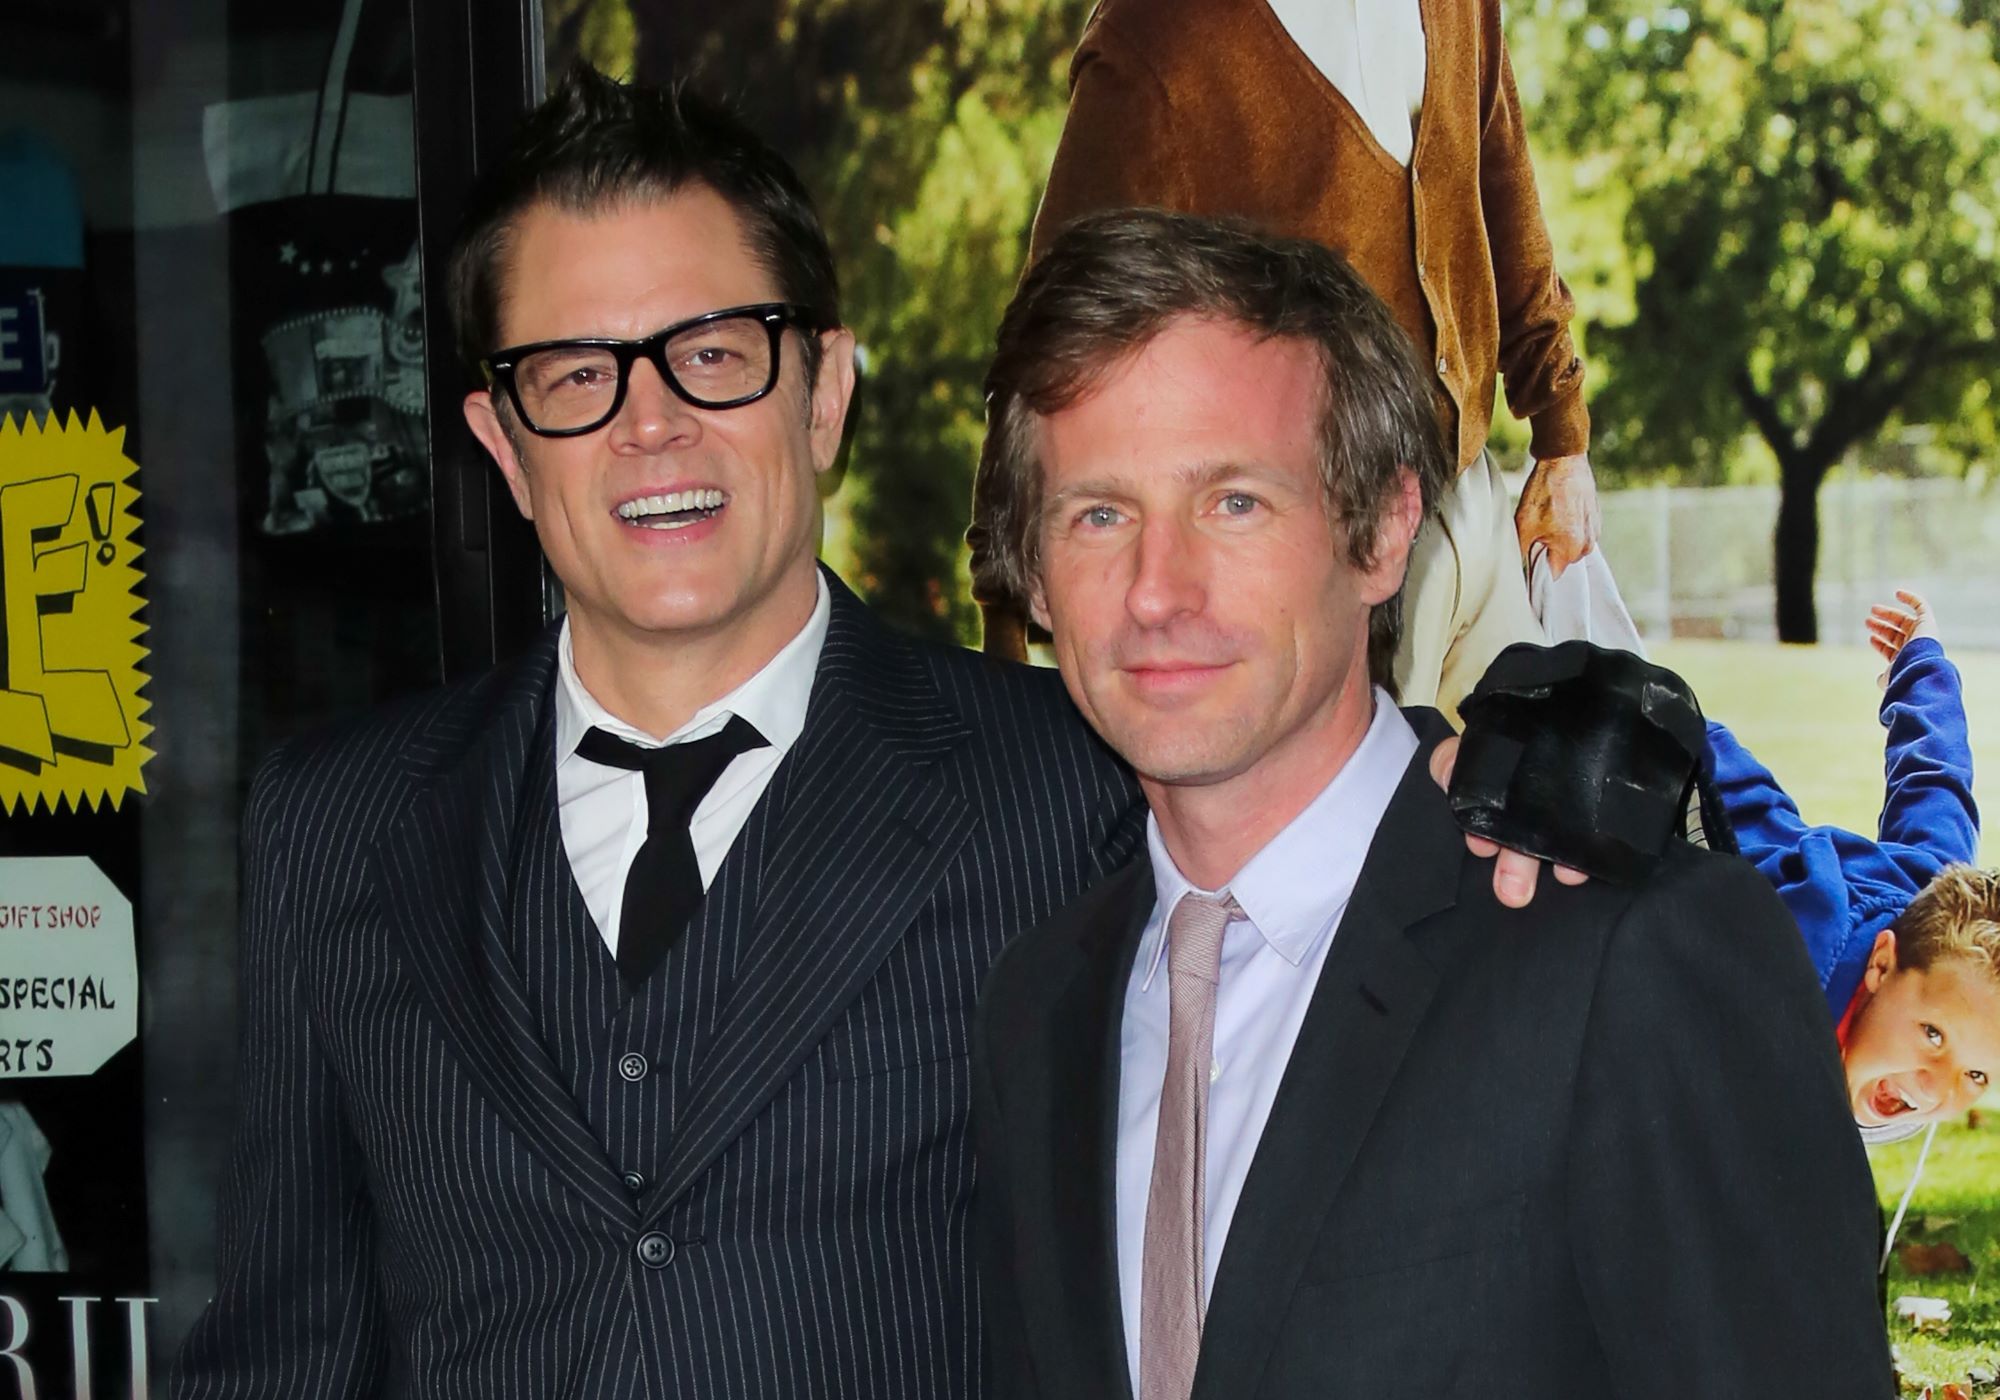 Johnny Knoxville and Spike Jonze attending a Jackass film premiere at the Chinese Theatre in Los Angeles, California